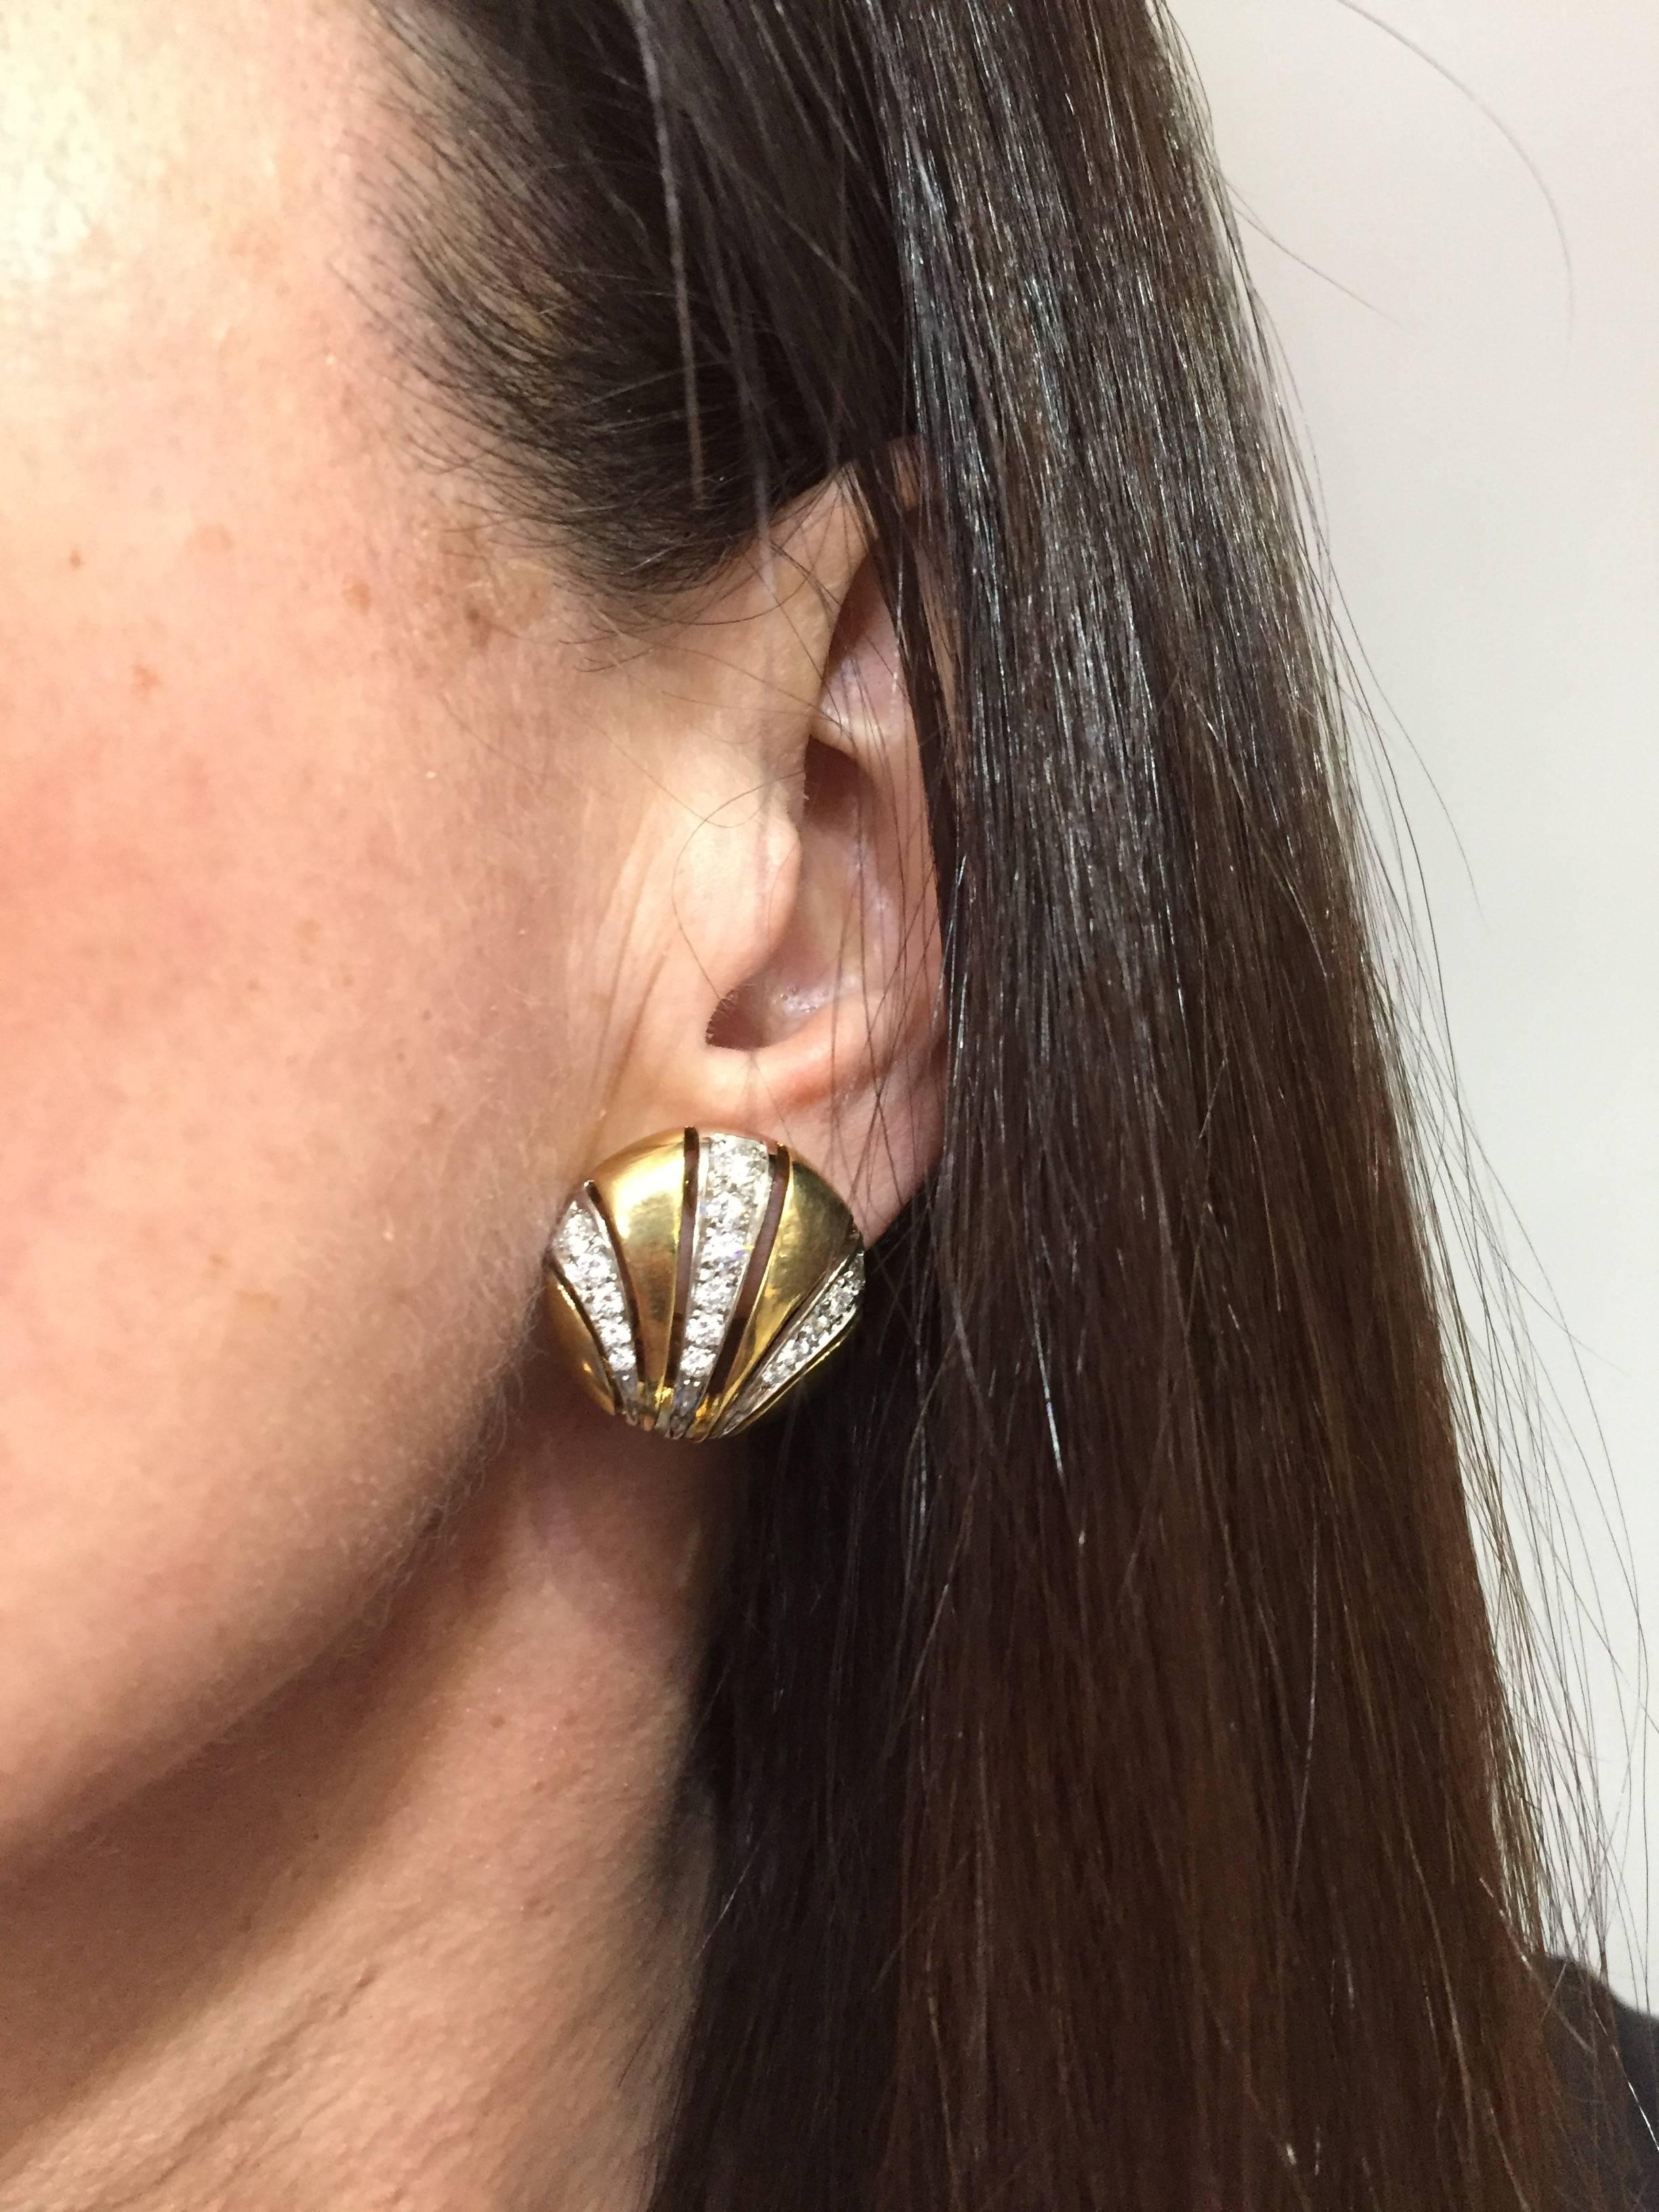 Classy and timeless ear clips created by Van Cleef & Arpels in the 1980s. 
Feminine, wearable and French chic, the earrings are a great addition to your jewelry collection.
Made of 18 karat yellow and white gold and set with round brilliant cut